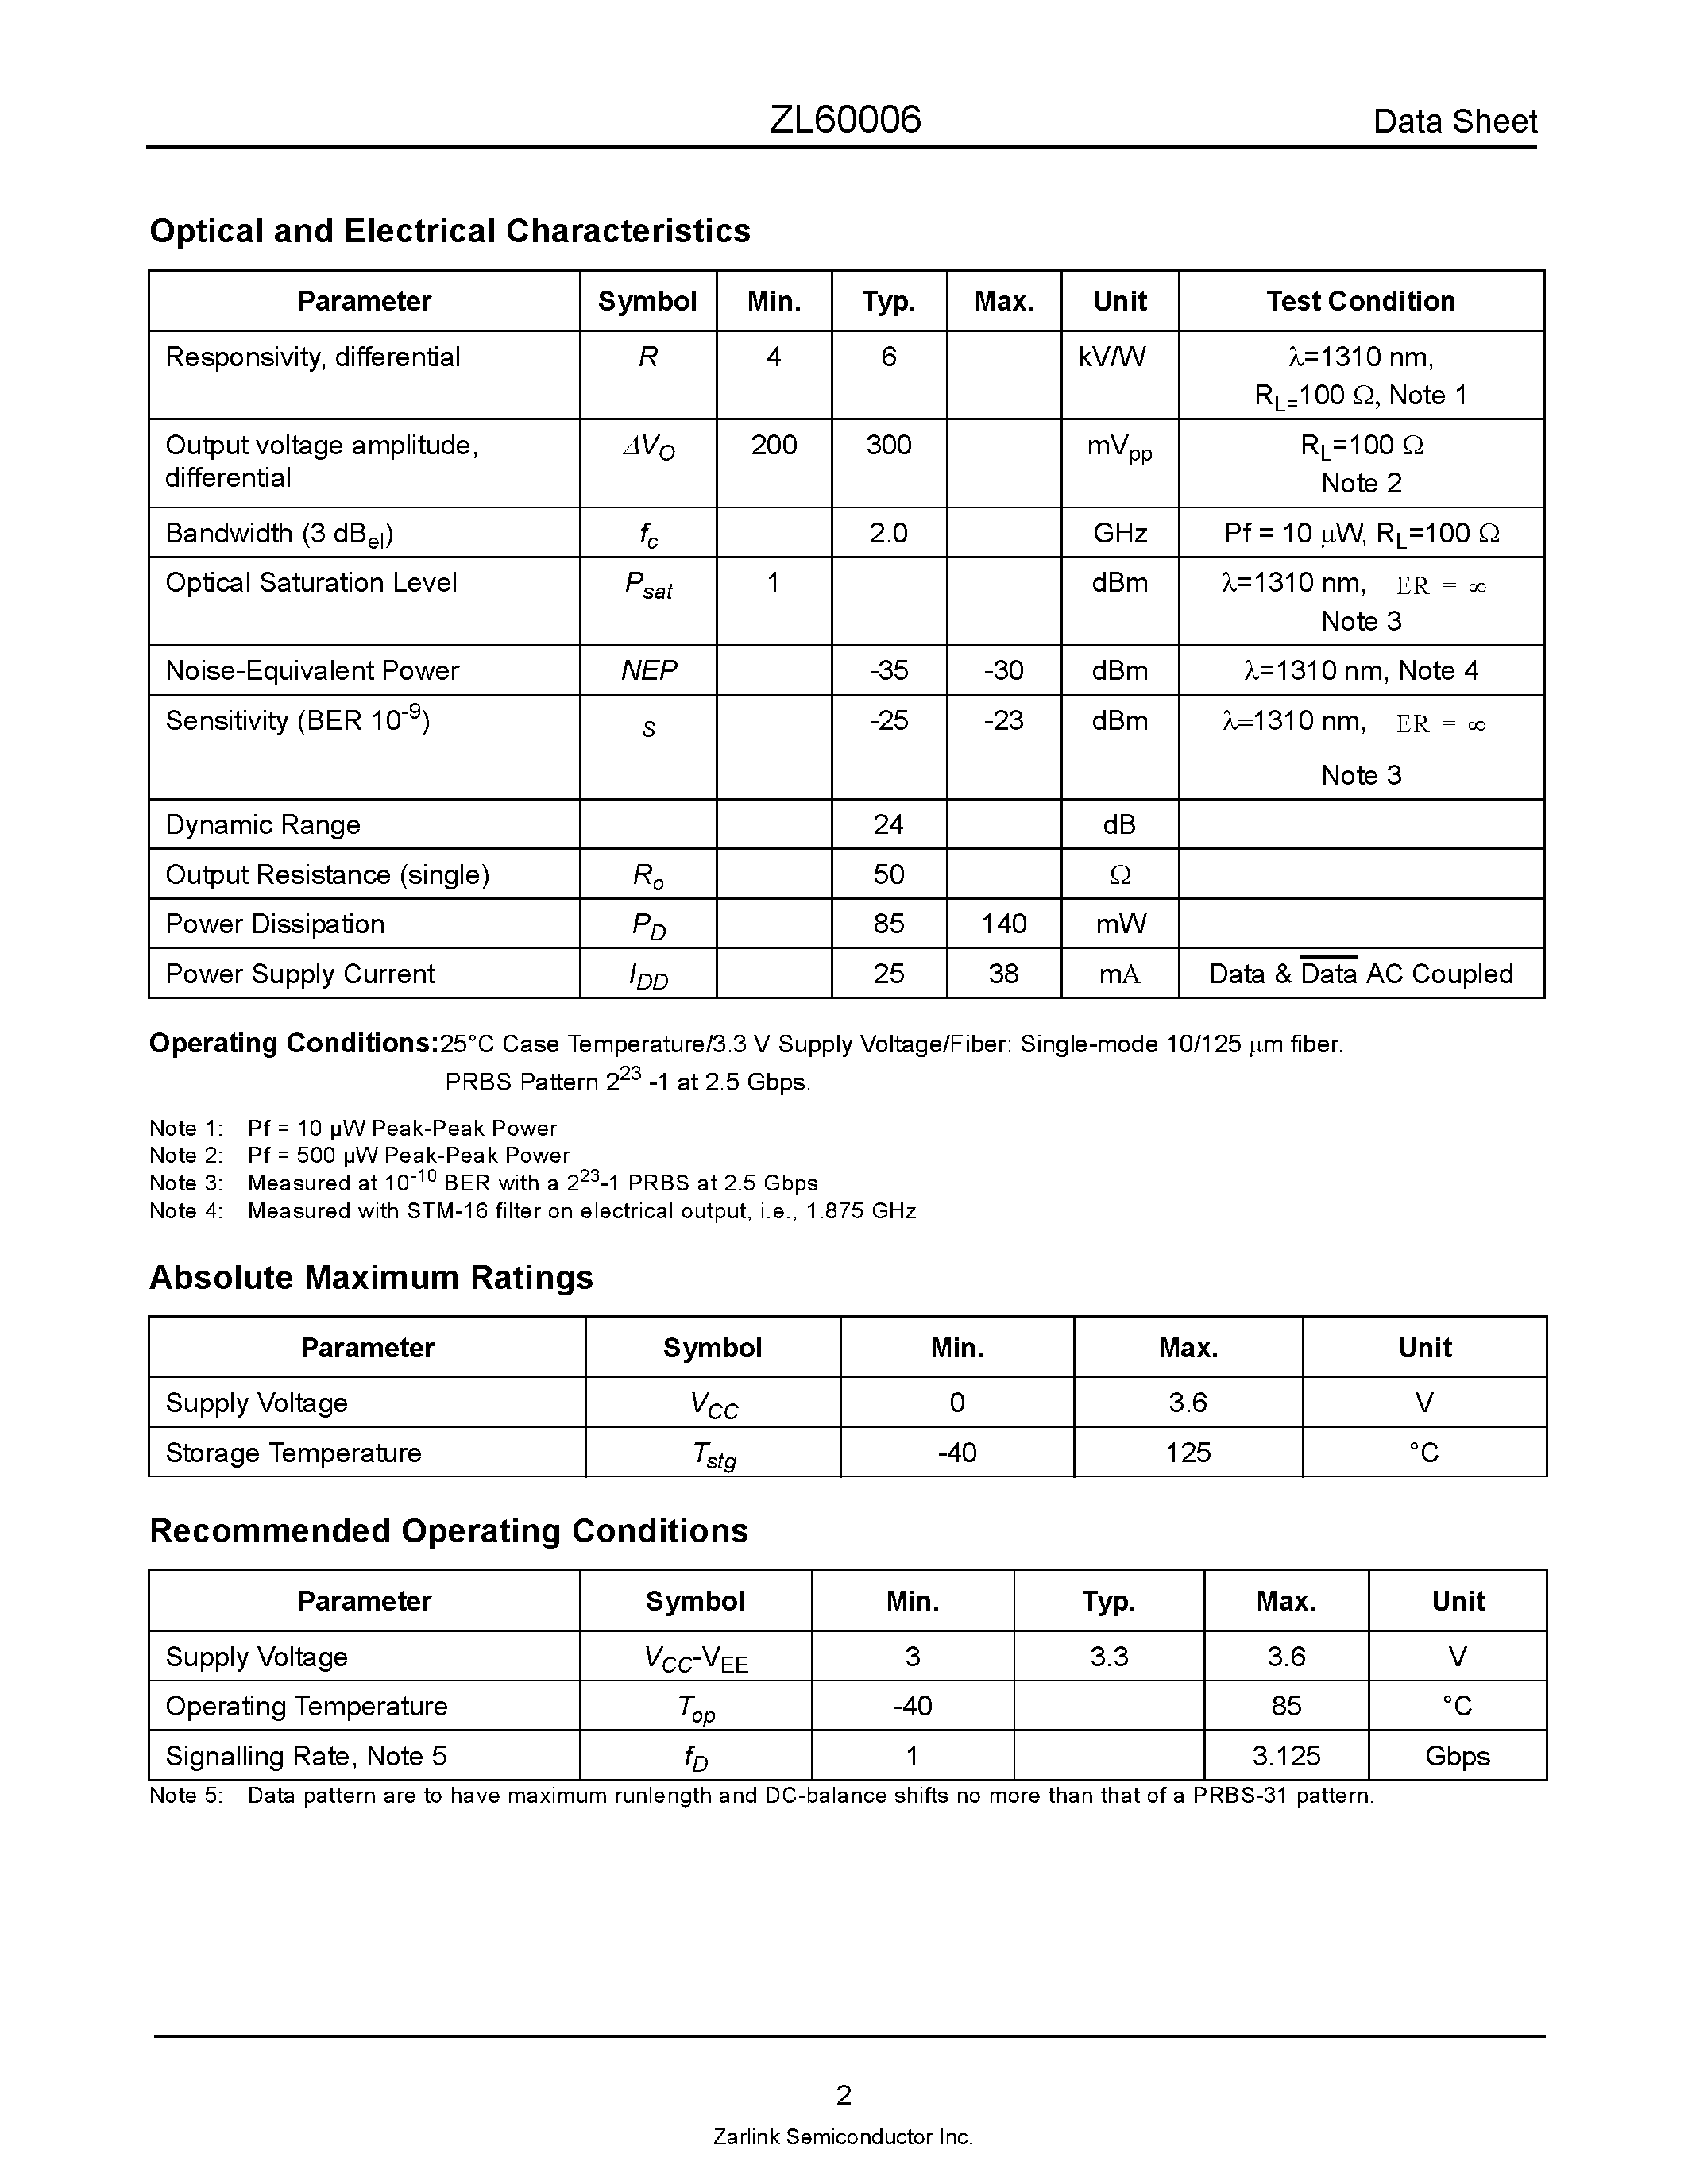 Datasheet ZL60006 - 2.5 Gbps PIN with Preamplifier page 2